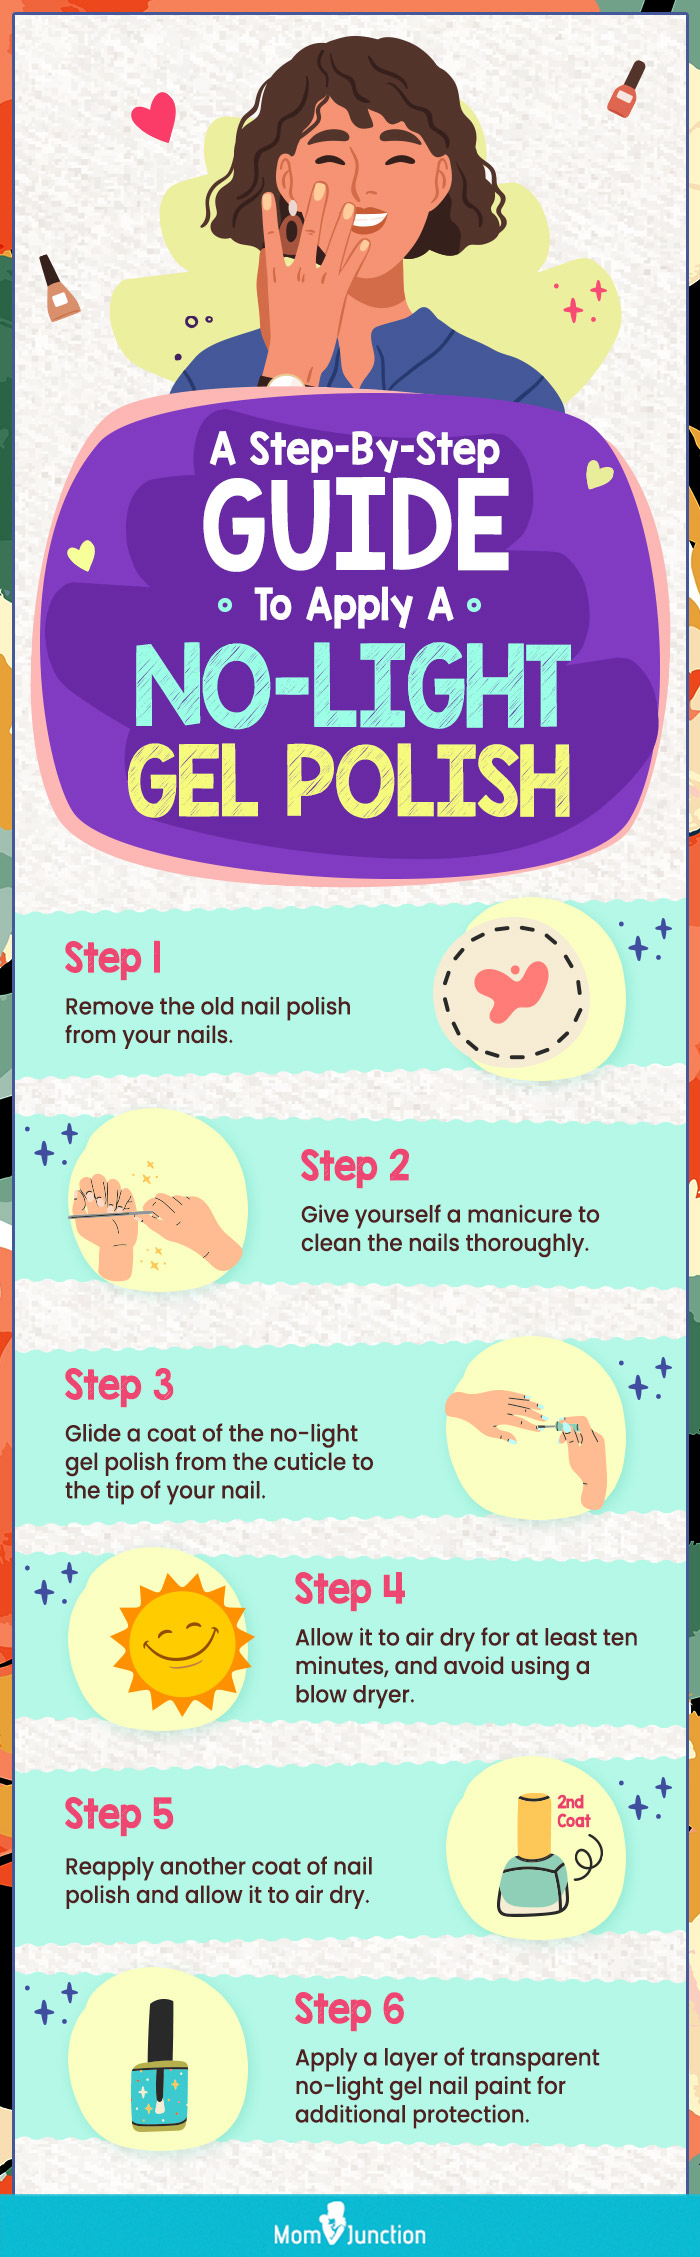 A Step By Step Guide To Apply A No Light Gel Polish (infographic)